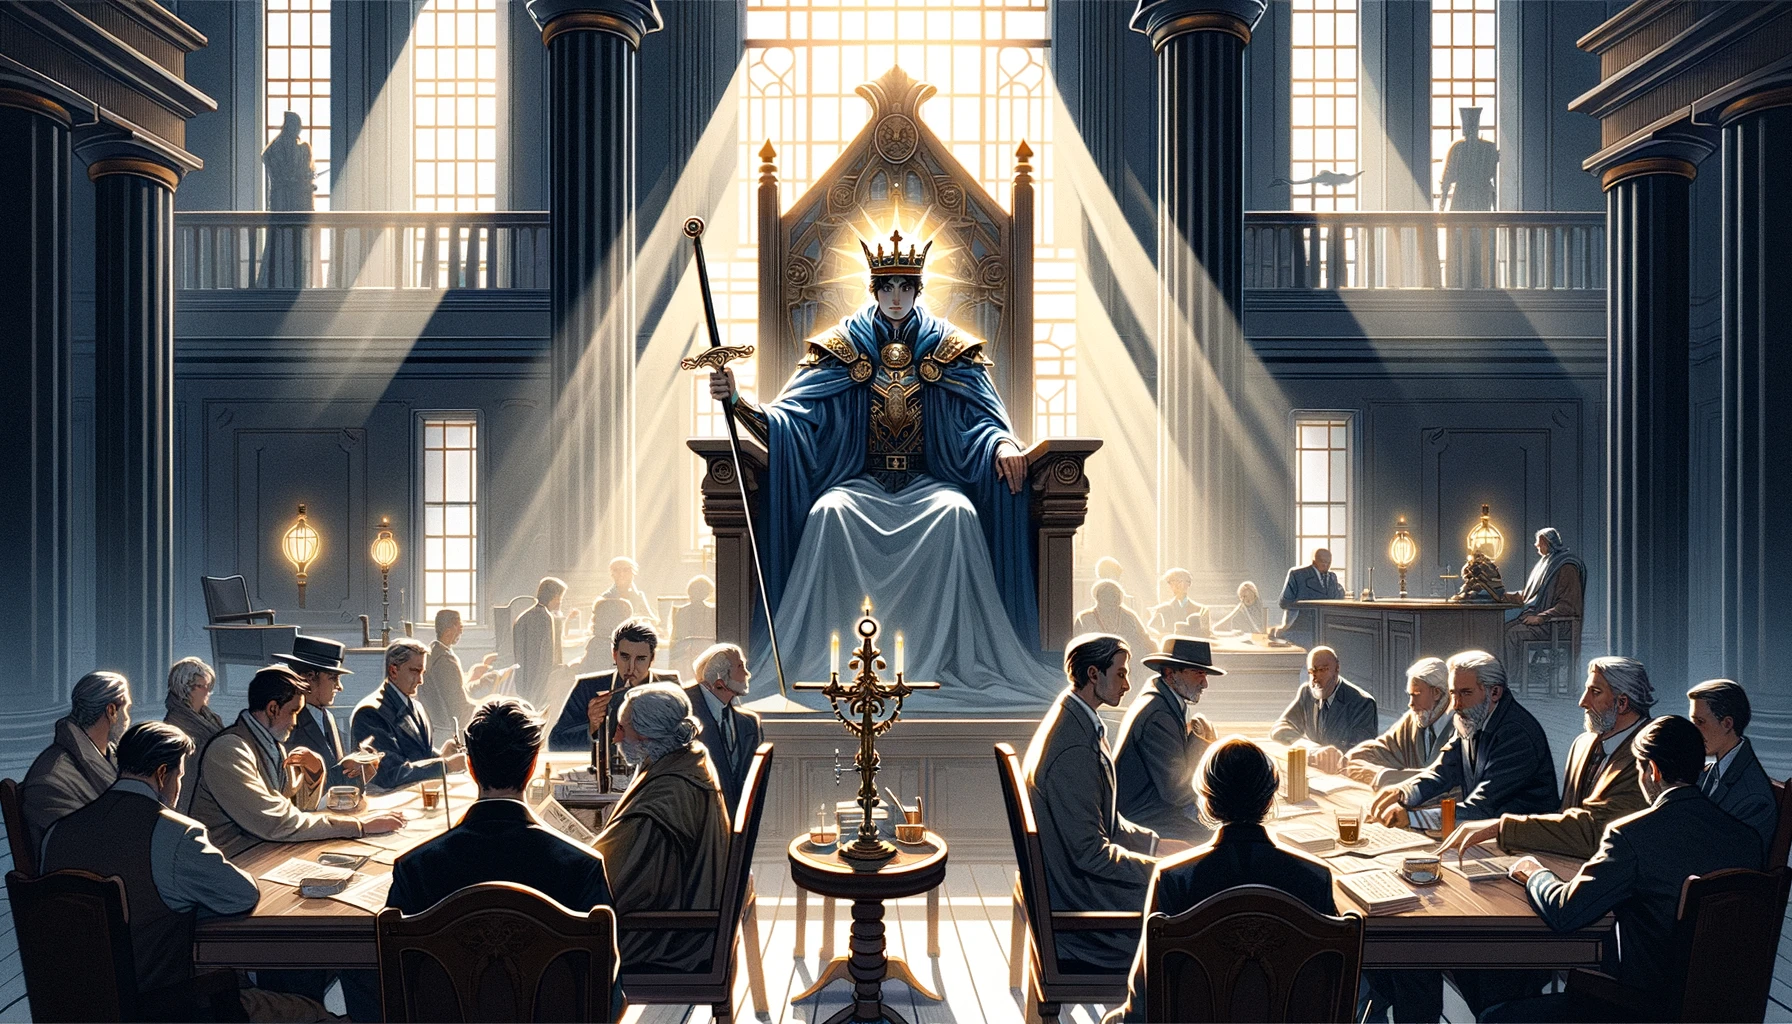 The image portrays the essence of intellectual leadership, clarity of thought, and decisive action as the King of Swords presides over a courtroom or council setting. He embodies wisdom, authority, and the role of a fair mediator. The structured and orderly environment, illuminated by light streaming in through windows, symbolizes the clarity and transparency he brings to the situation, emphasizing the card's association with sound judgment and ethical leadership.